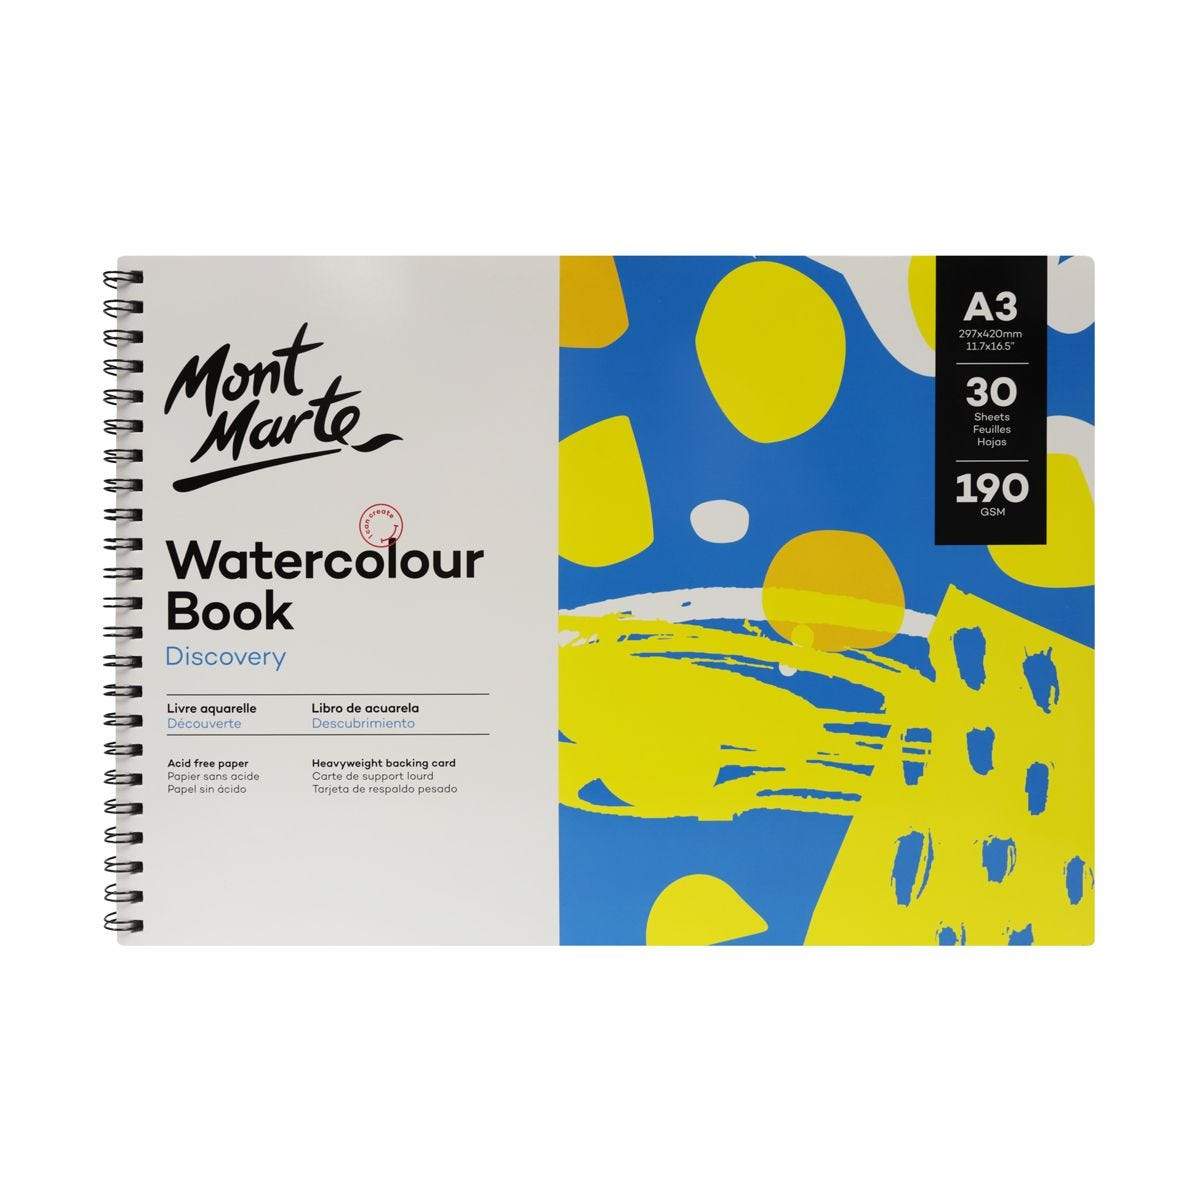 Watercolour Book 30 sheets 190gsm Discovery A3